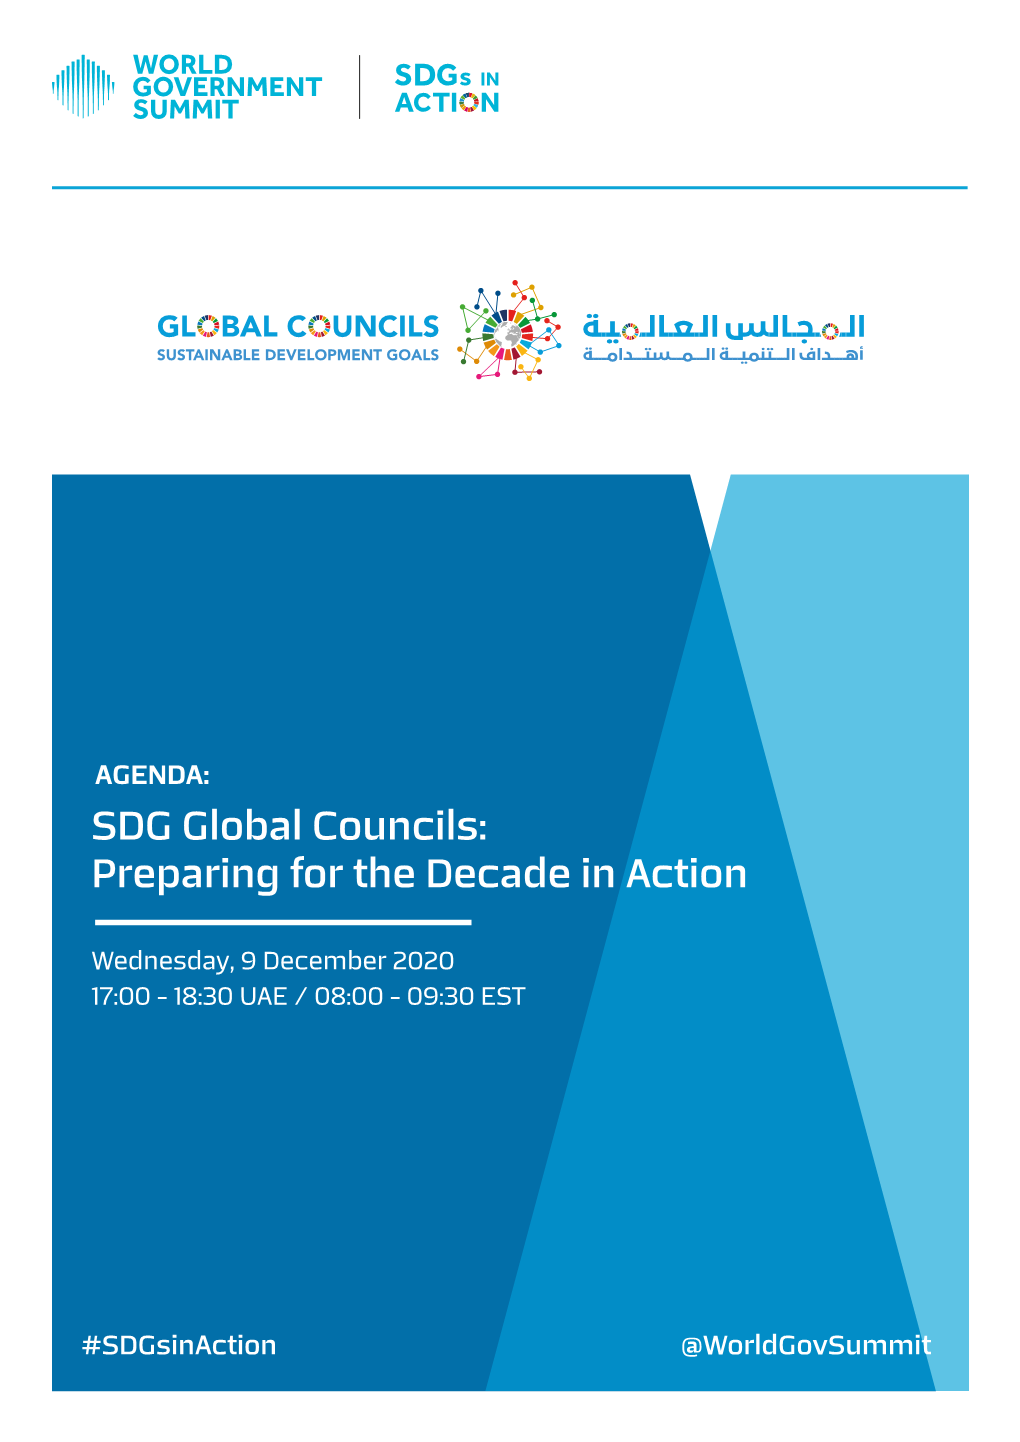 Sdgs in Action @ World Government Summit Virtual Event 2020 ‘Sdgs Global Councils: Preparing for the Decade of Action’